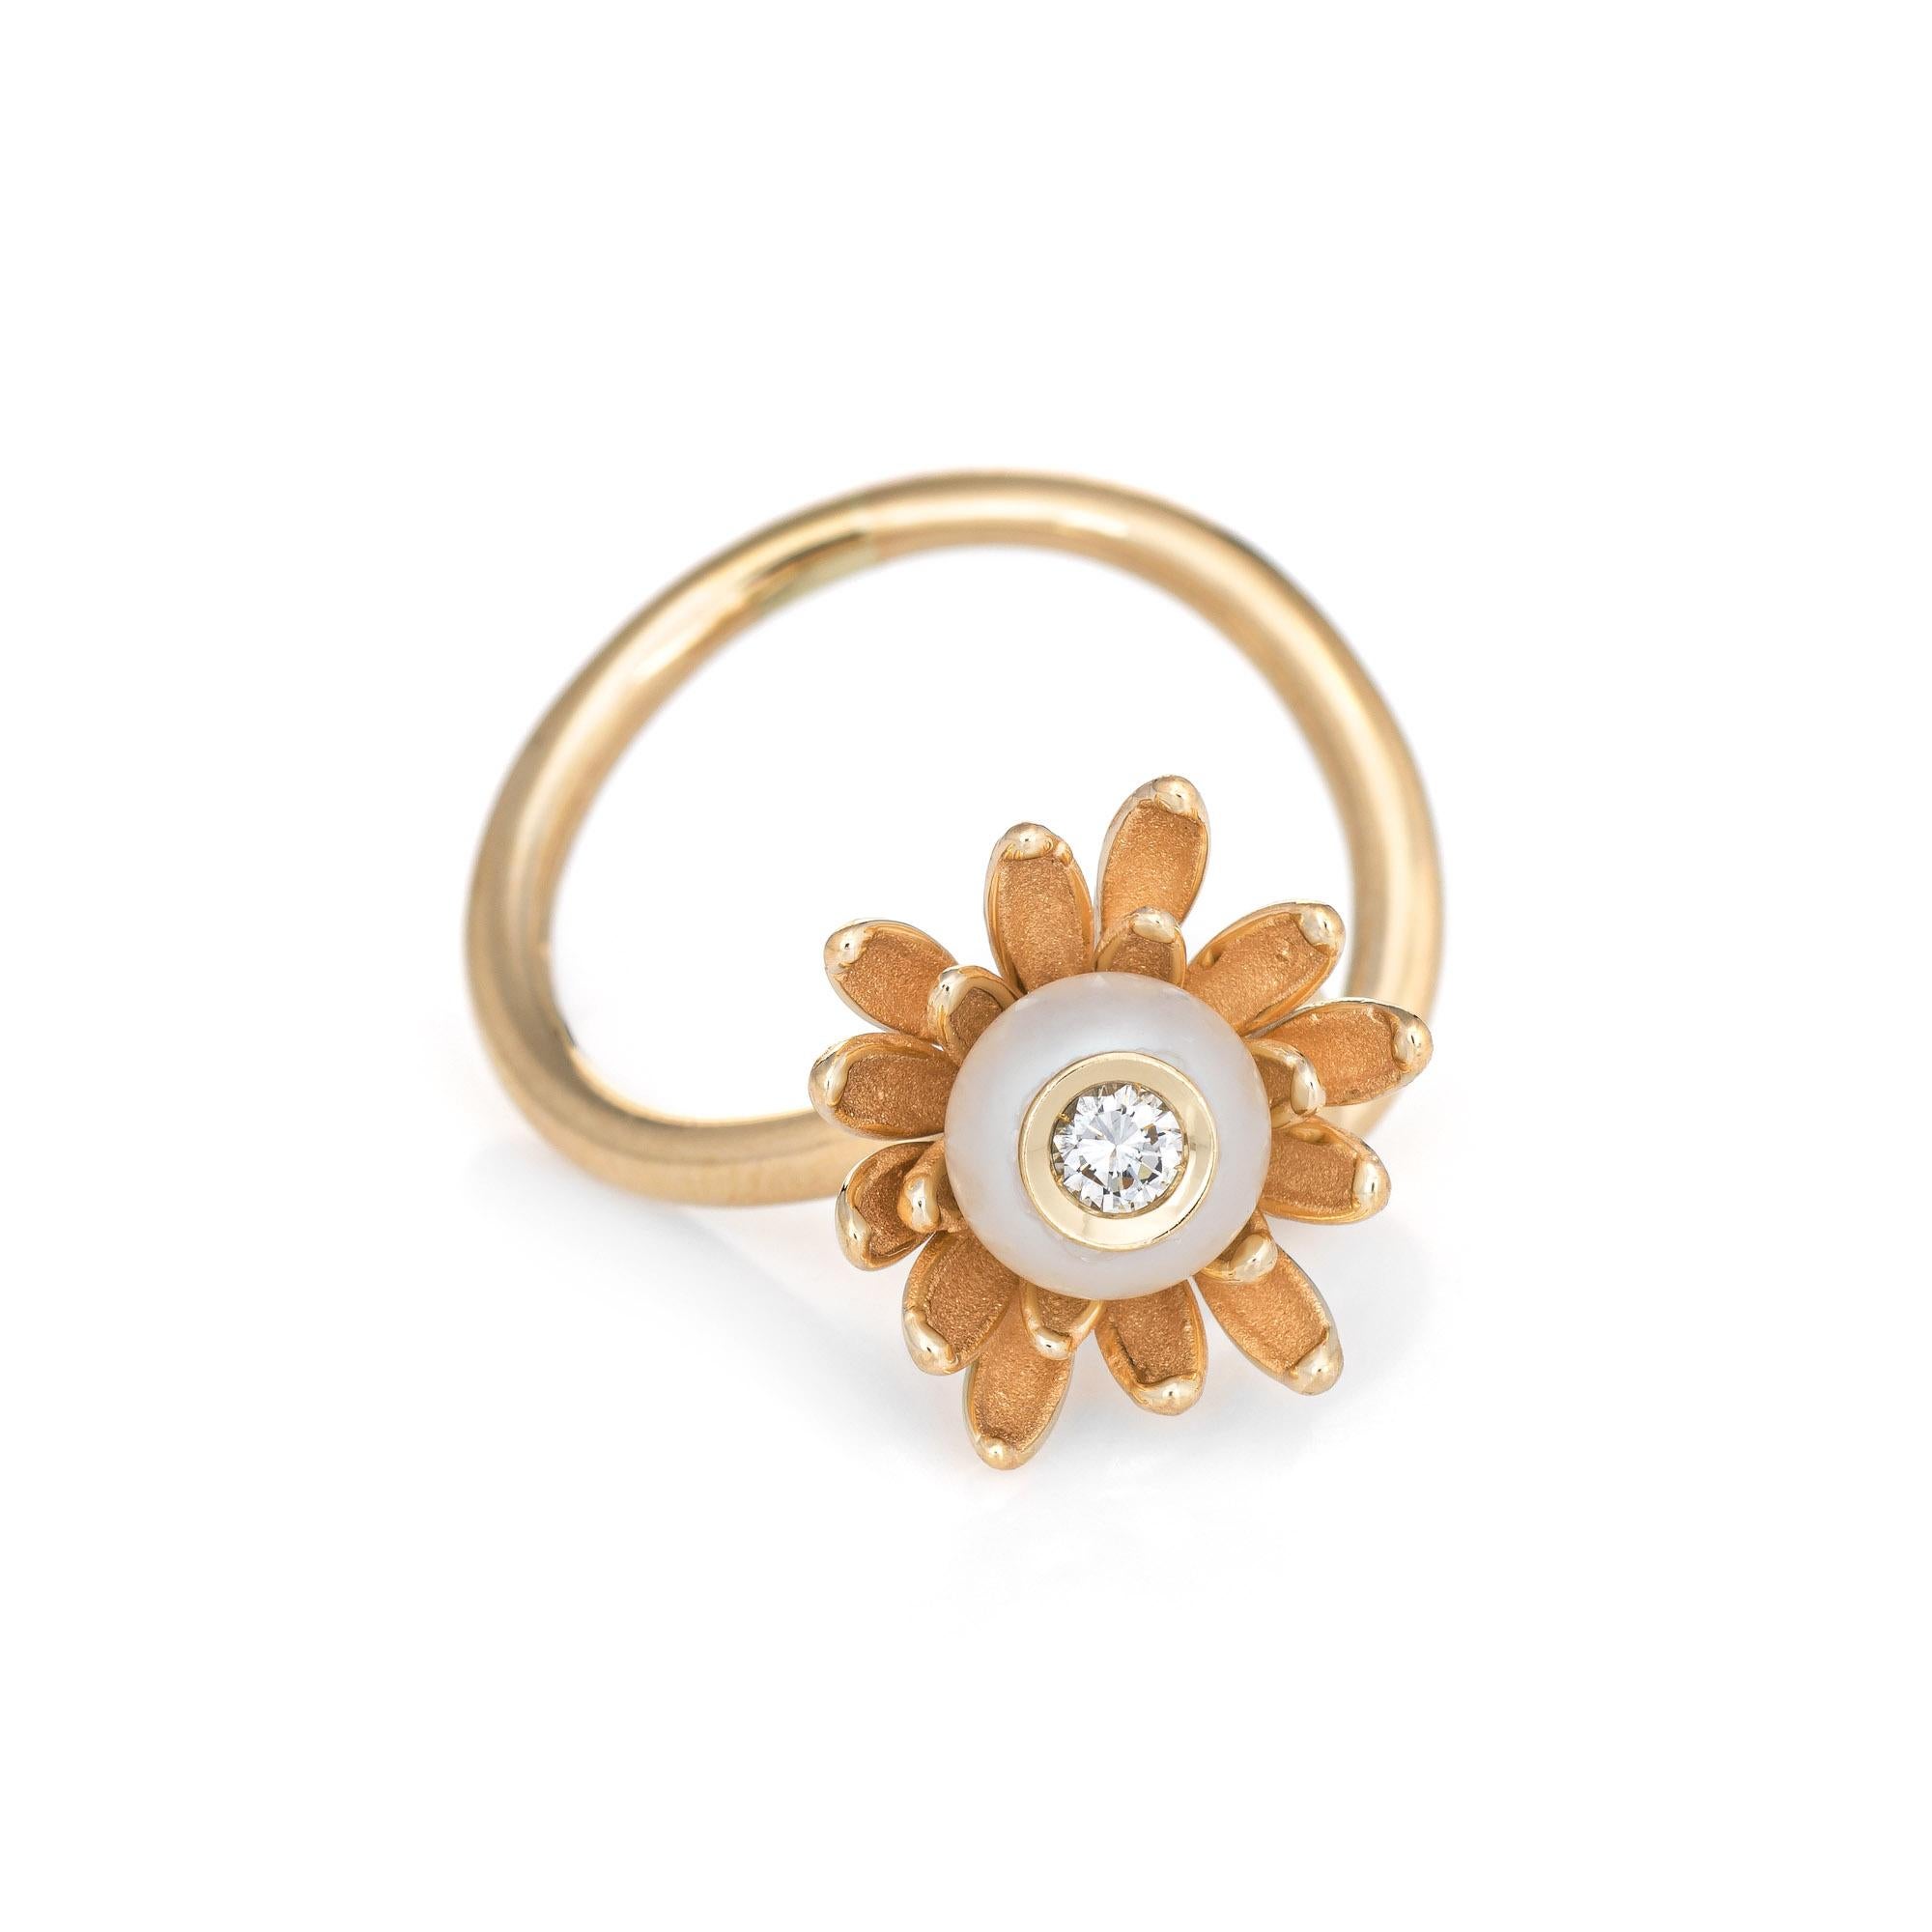 Stylish vintage pearl & diamond flower ring crafted in 14 karat yellow gold. 

7mm cultured pearl is set with an estimated 0.10 carat diamond (estimated at G-H color and VS clarity). The pearl is in excellent condition and free of cracks or chips.